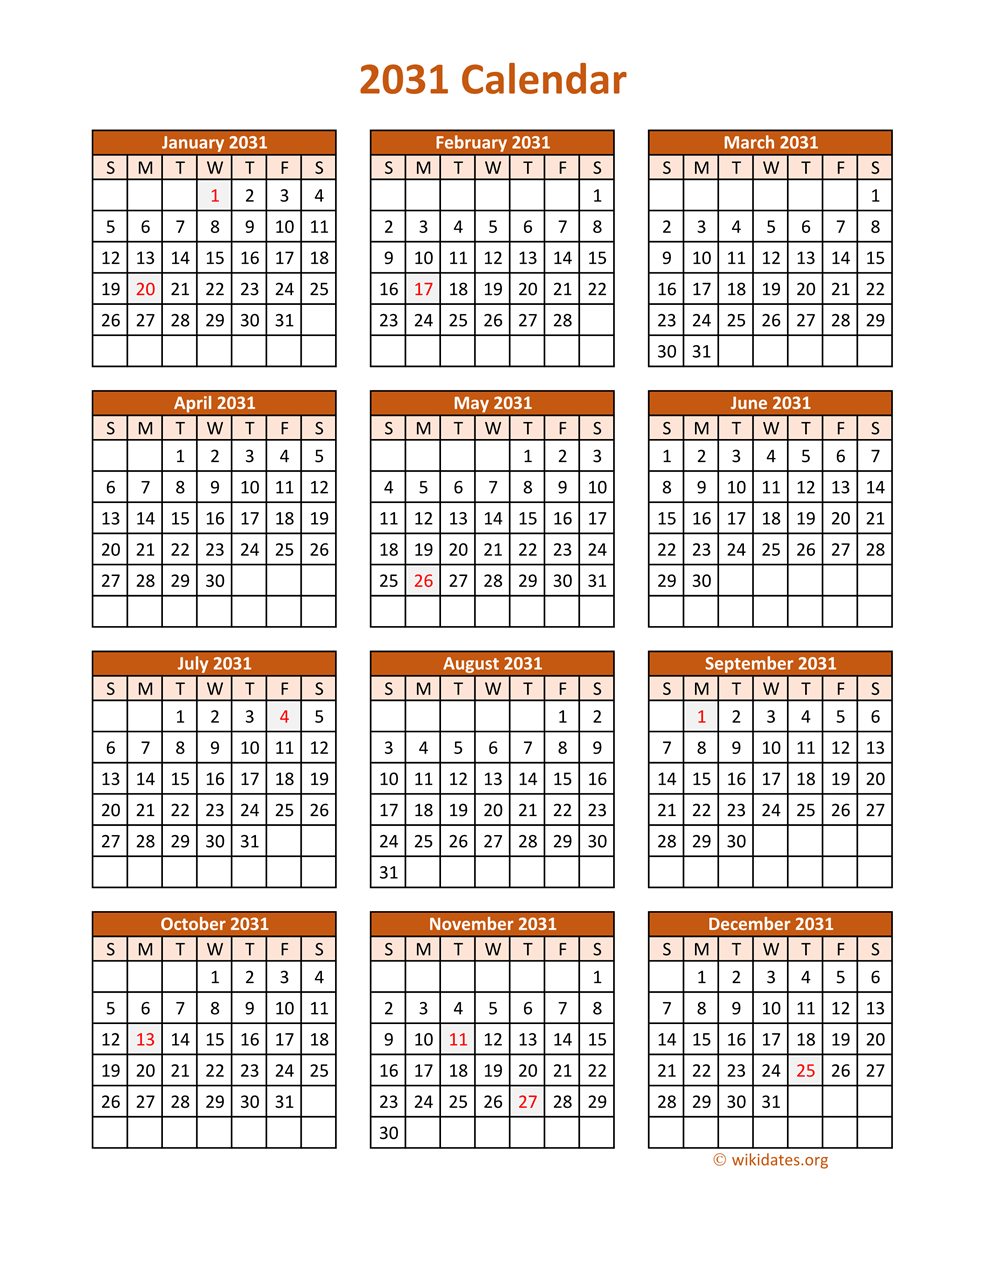 full-year-2031-calendar-on-one-page-wikidates